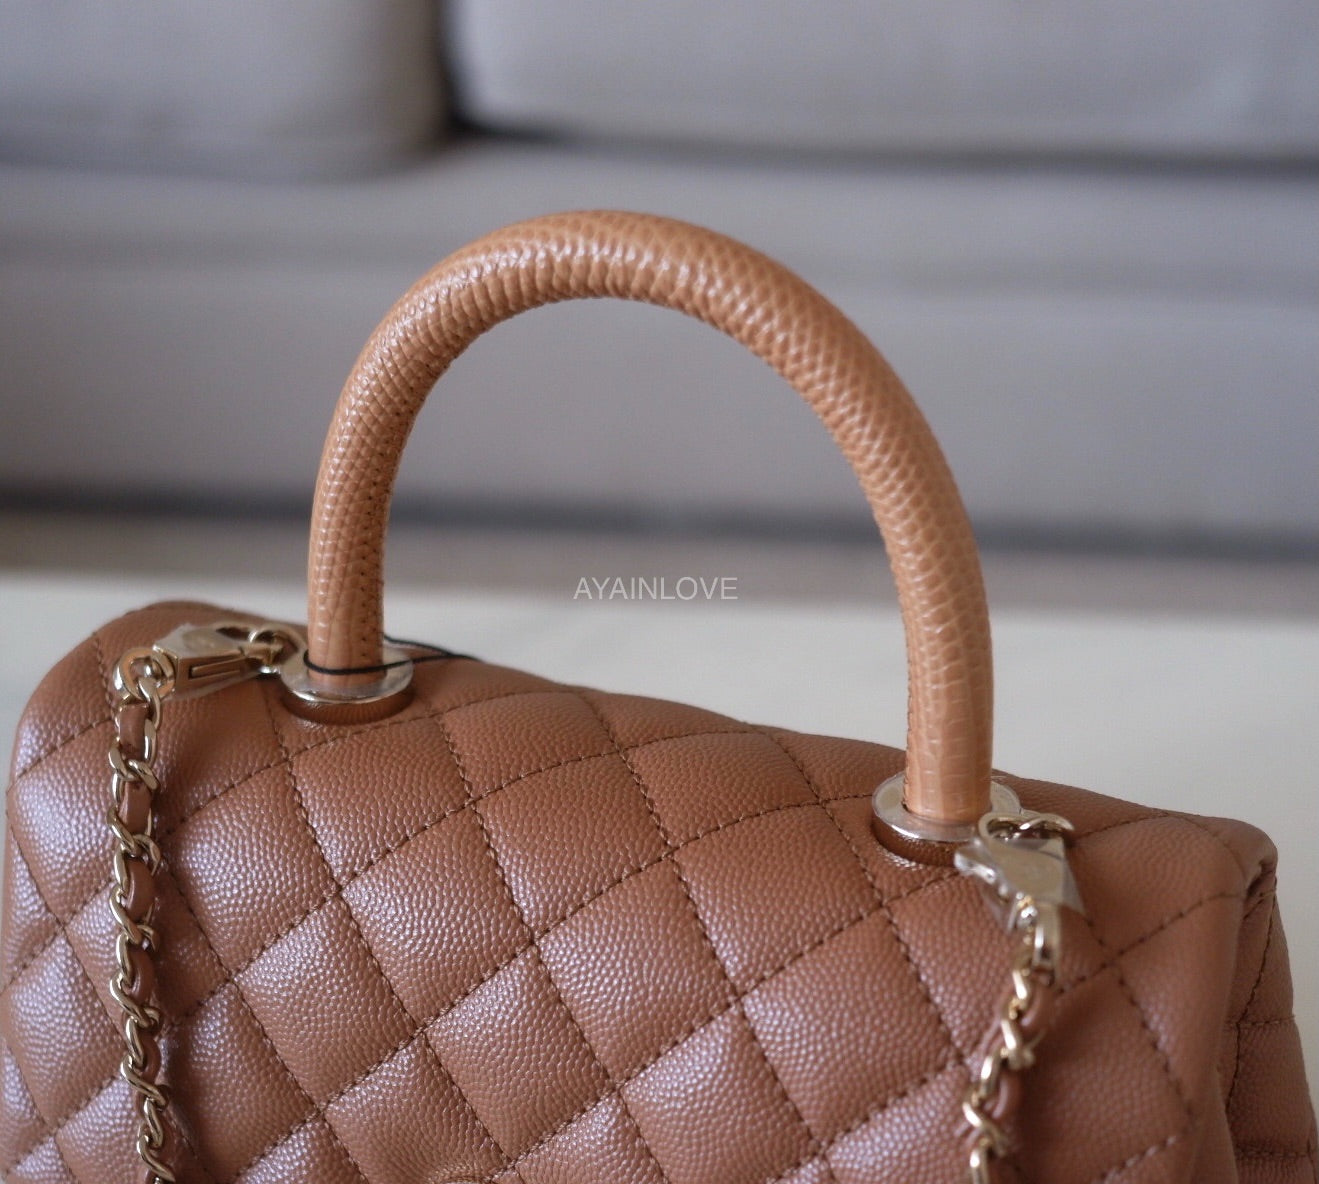 Purchase of Chanel bags